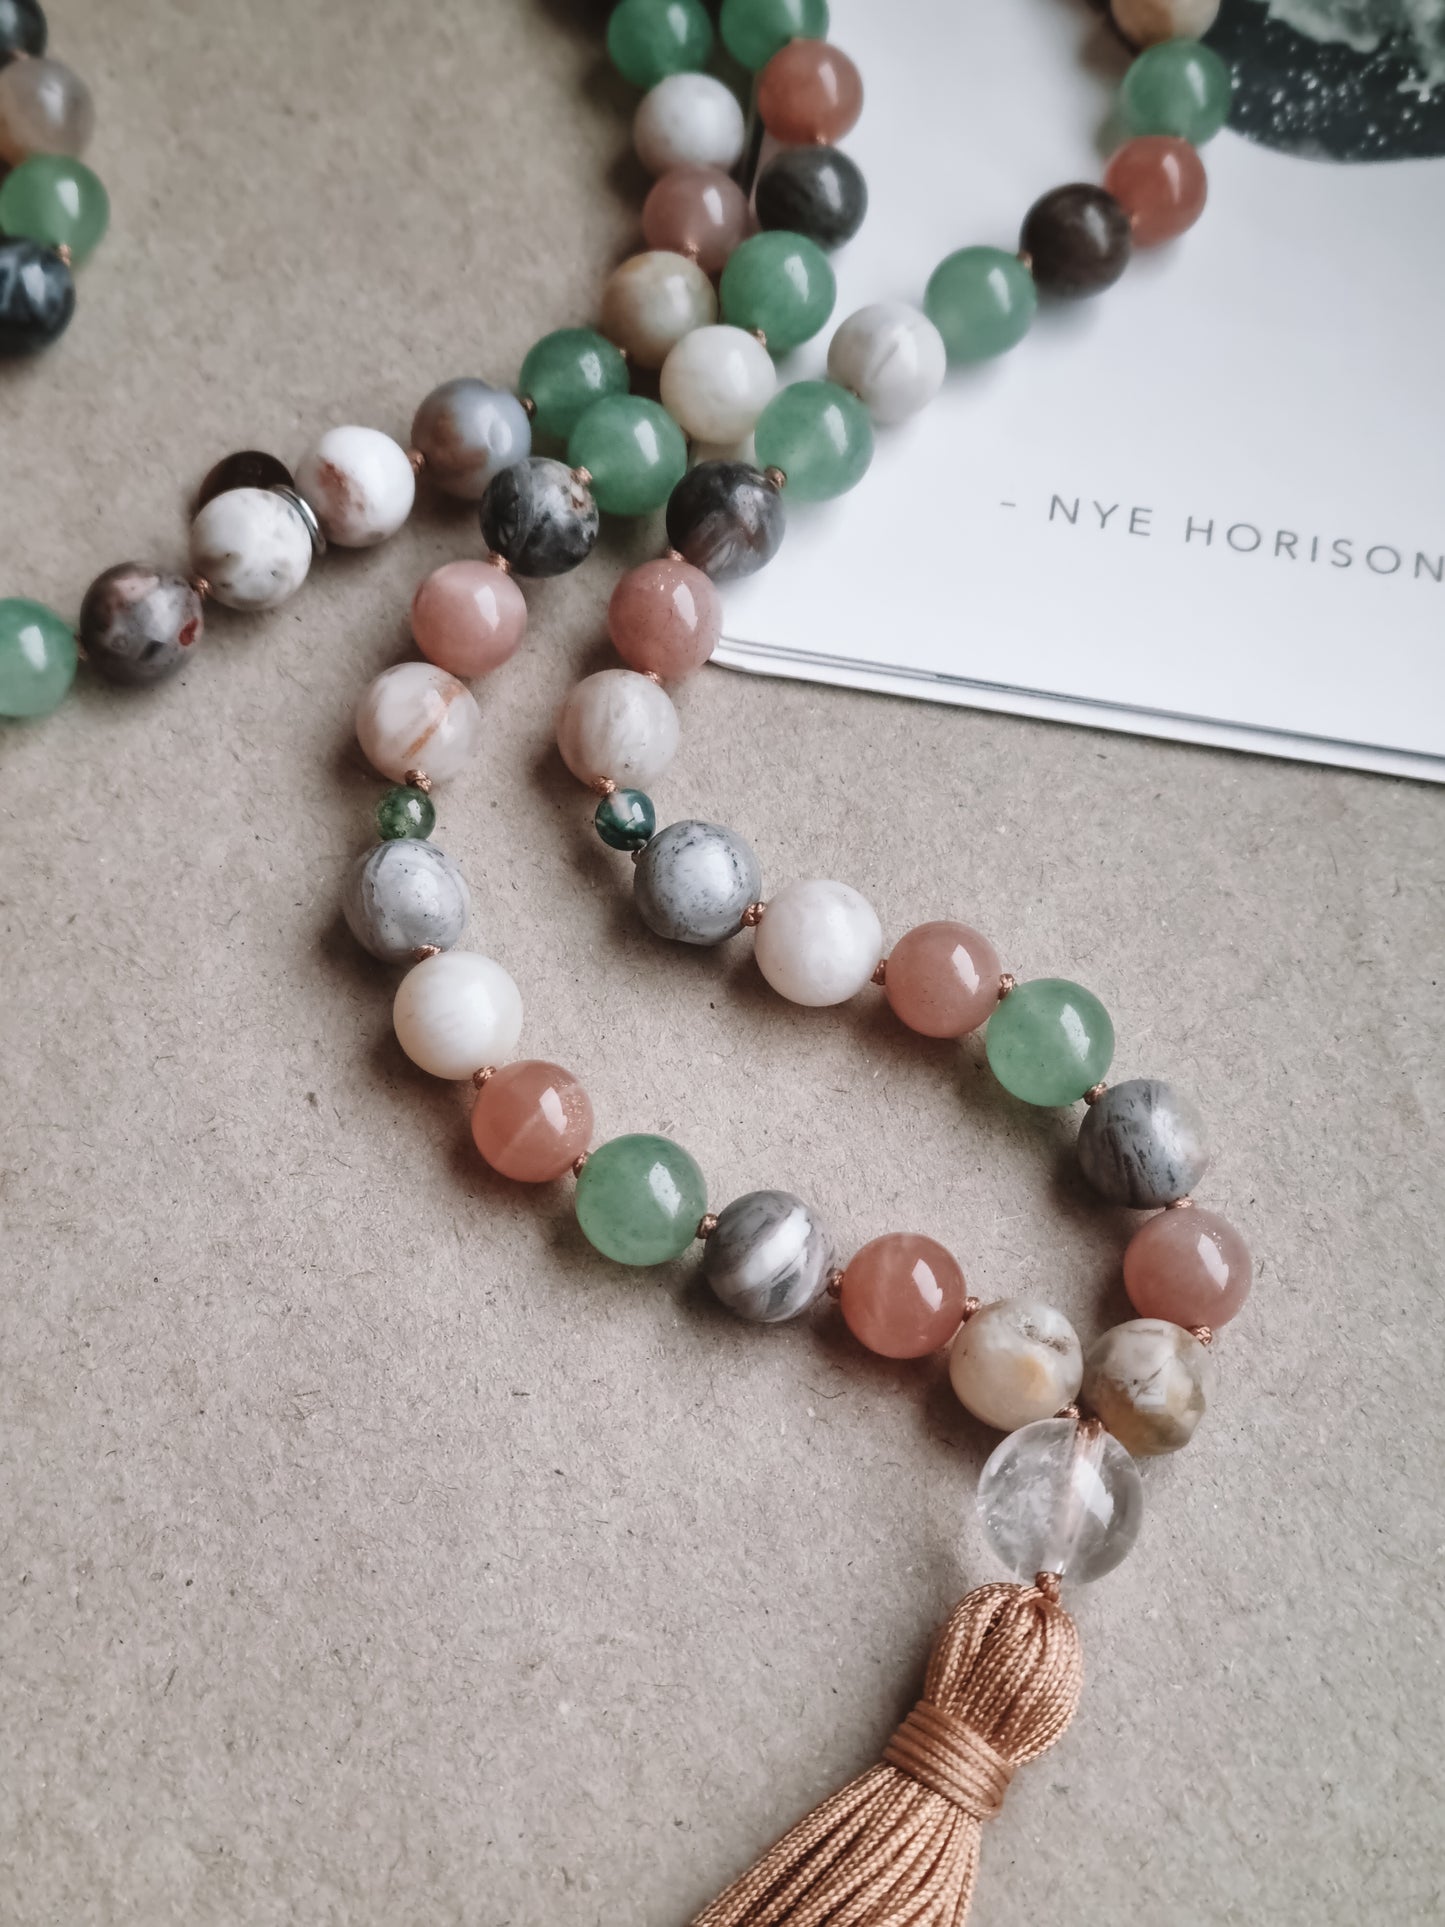 Mantra Mala - 'I am open to what the universe offers me'